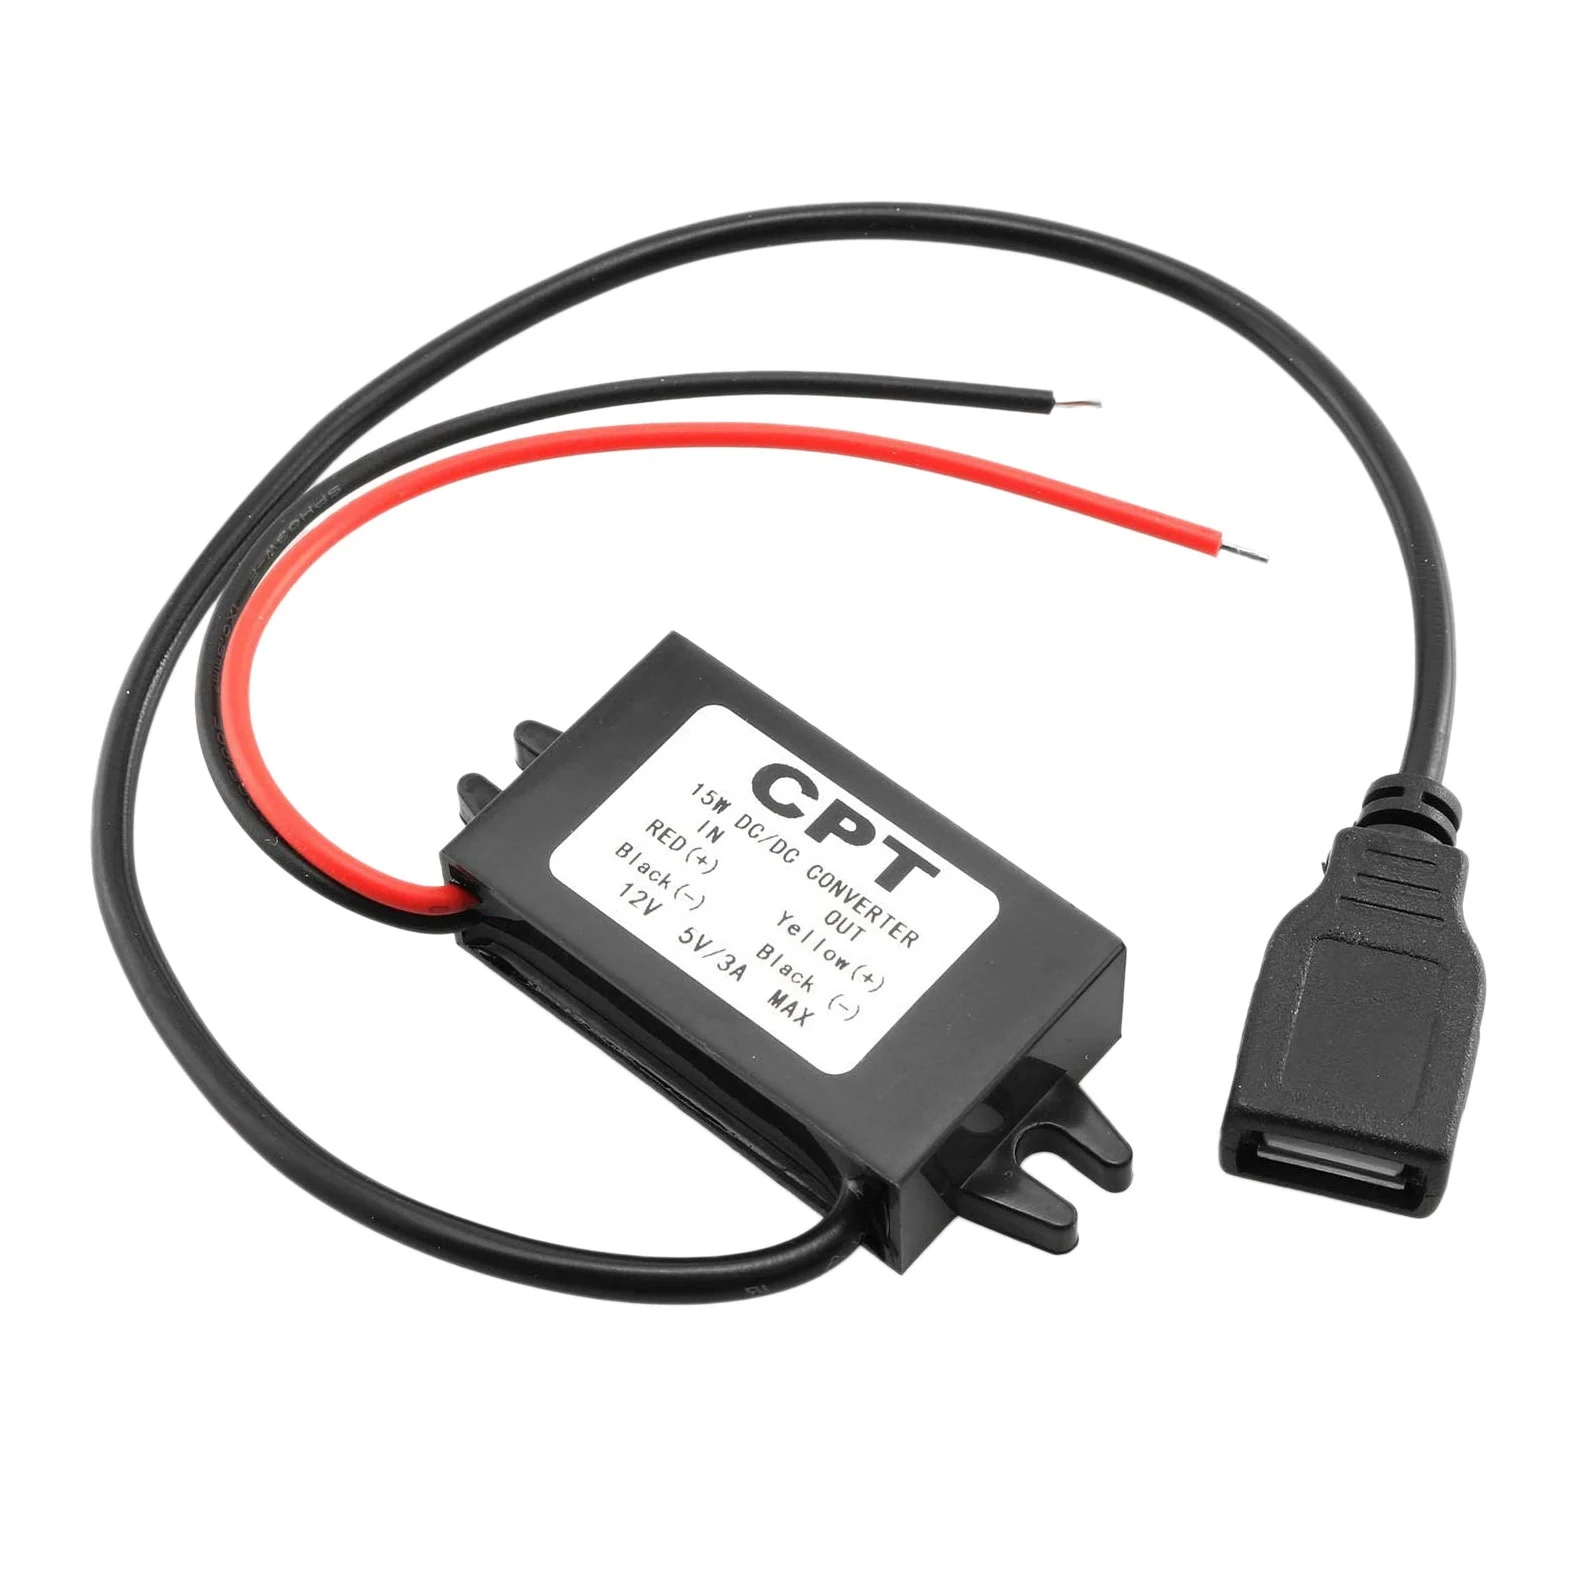 Car Power Converter DC 12V to 5V 3A Voltage Converter with Single USB  Adapter Connectors for Phone Charging Car Audio - AliExpress